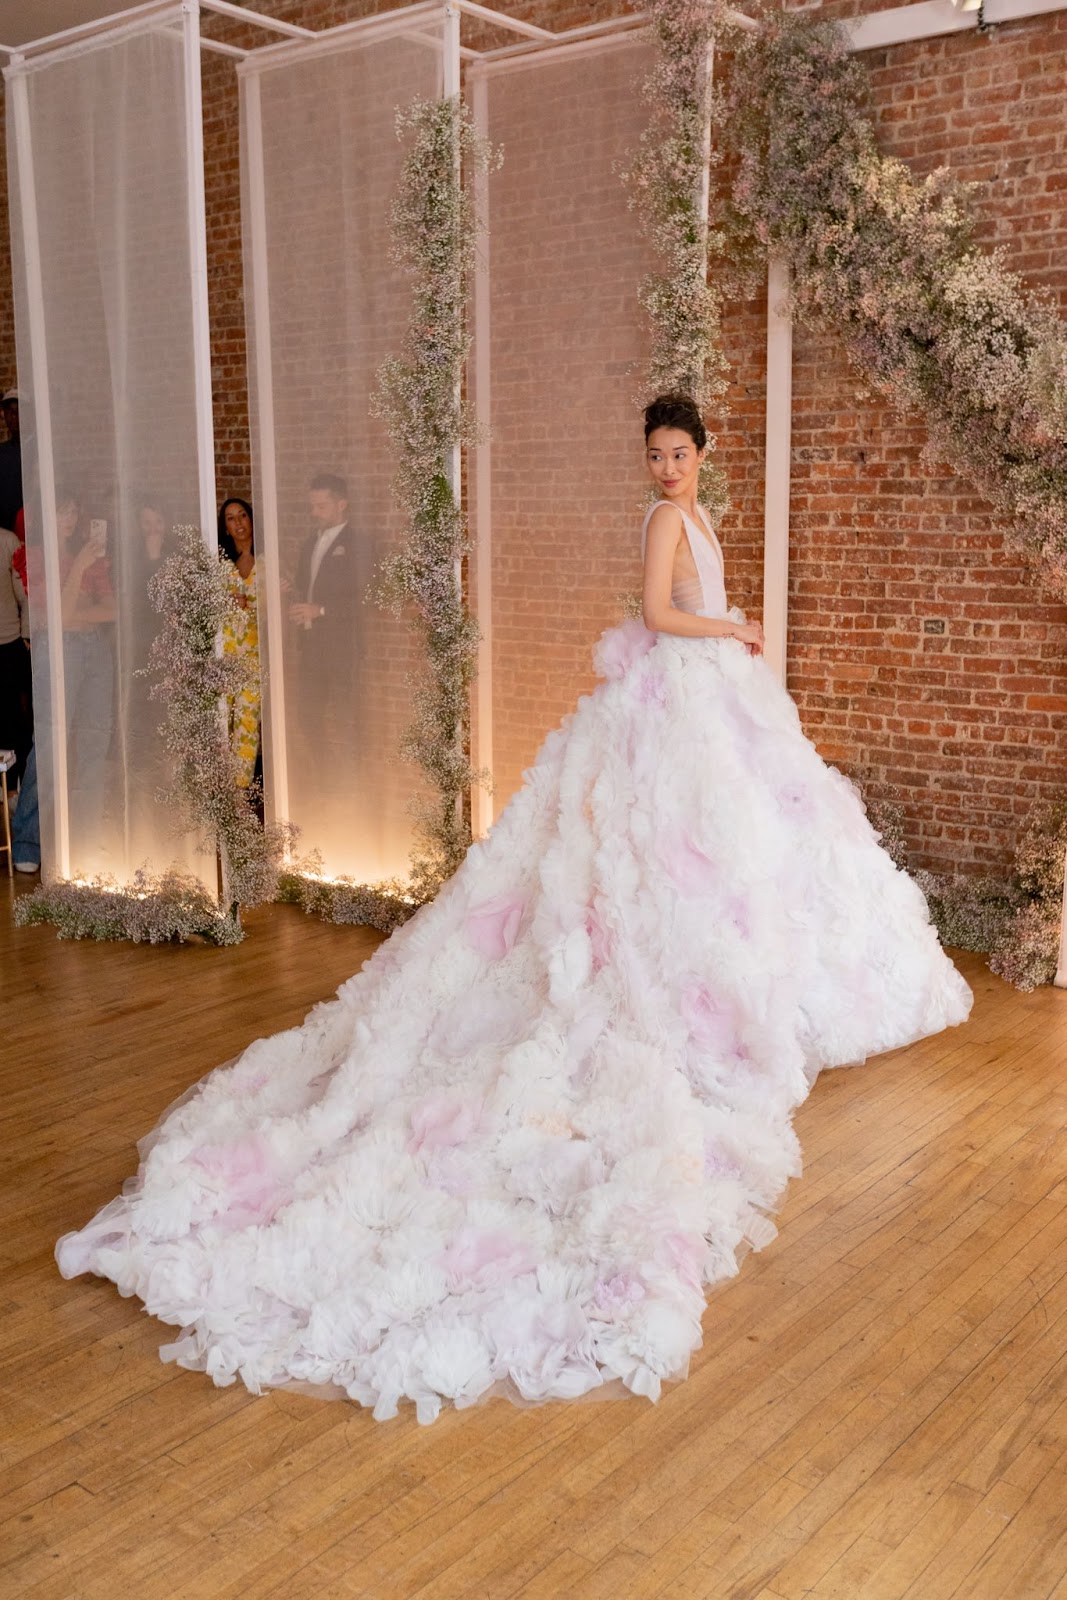 Pops of pastel on this whimsical wedding gown.